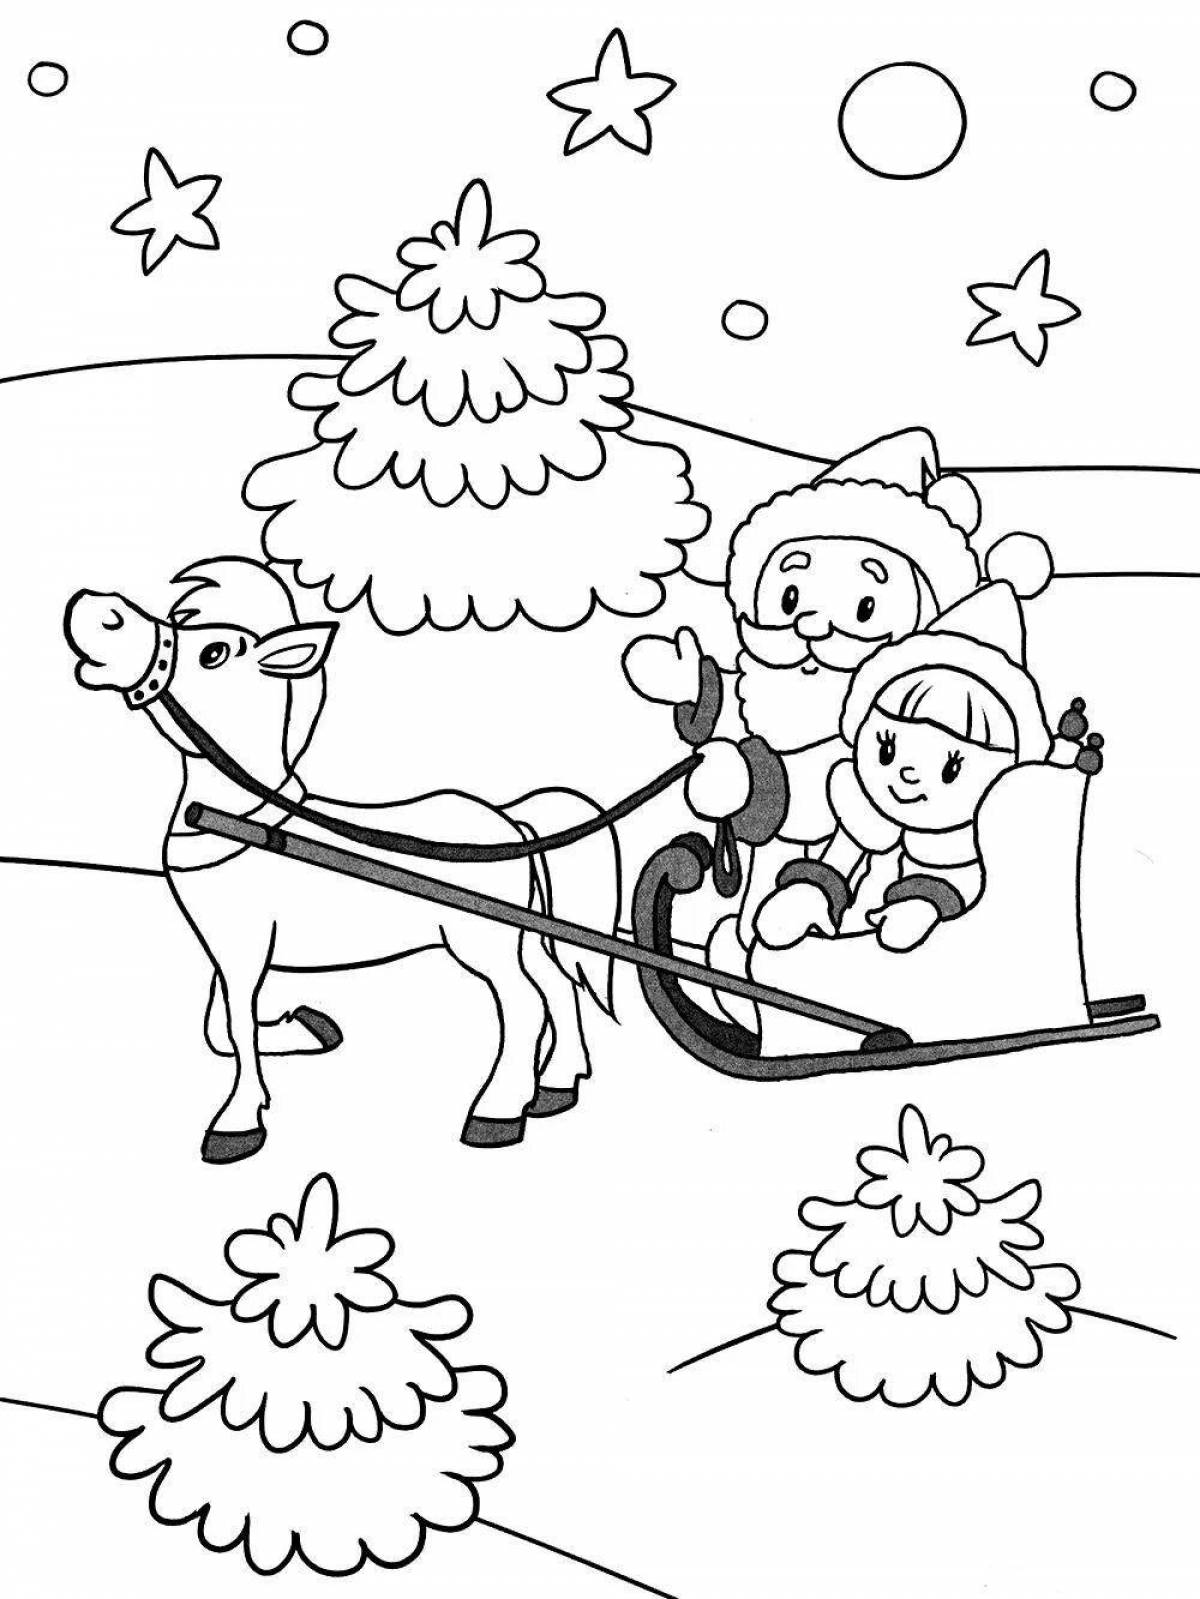 Children's winter coloring book for kids